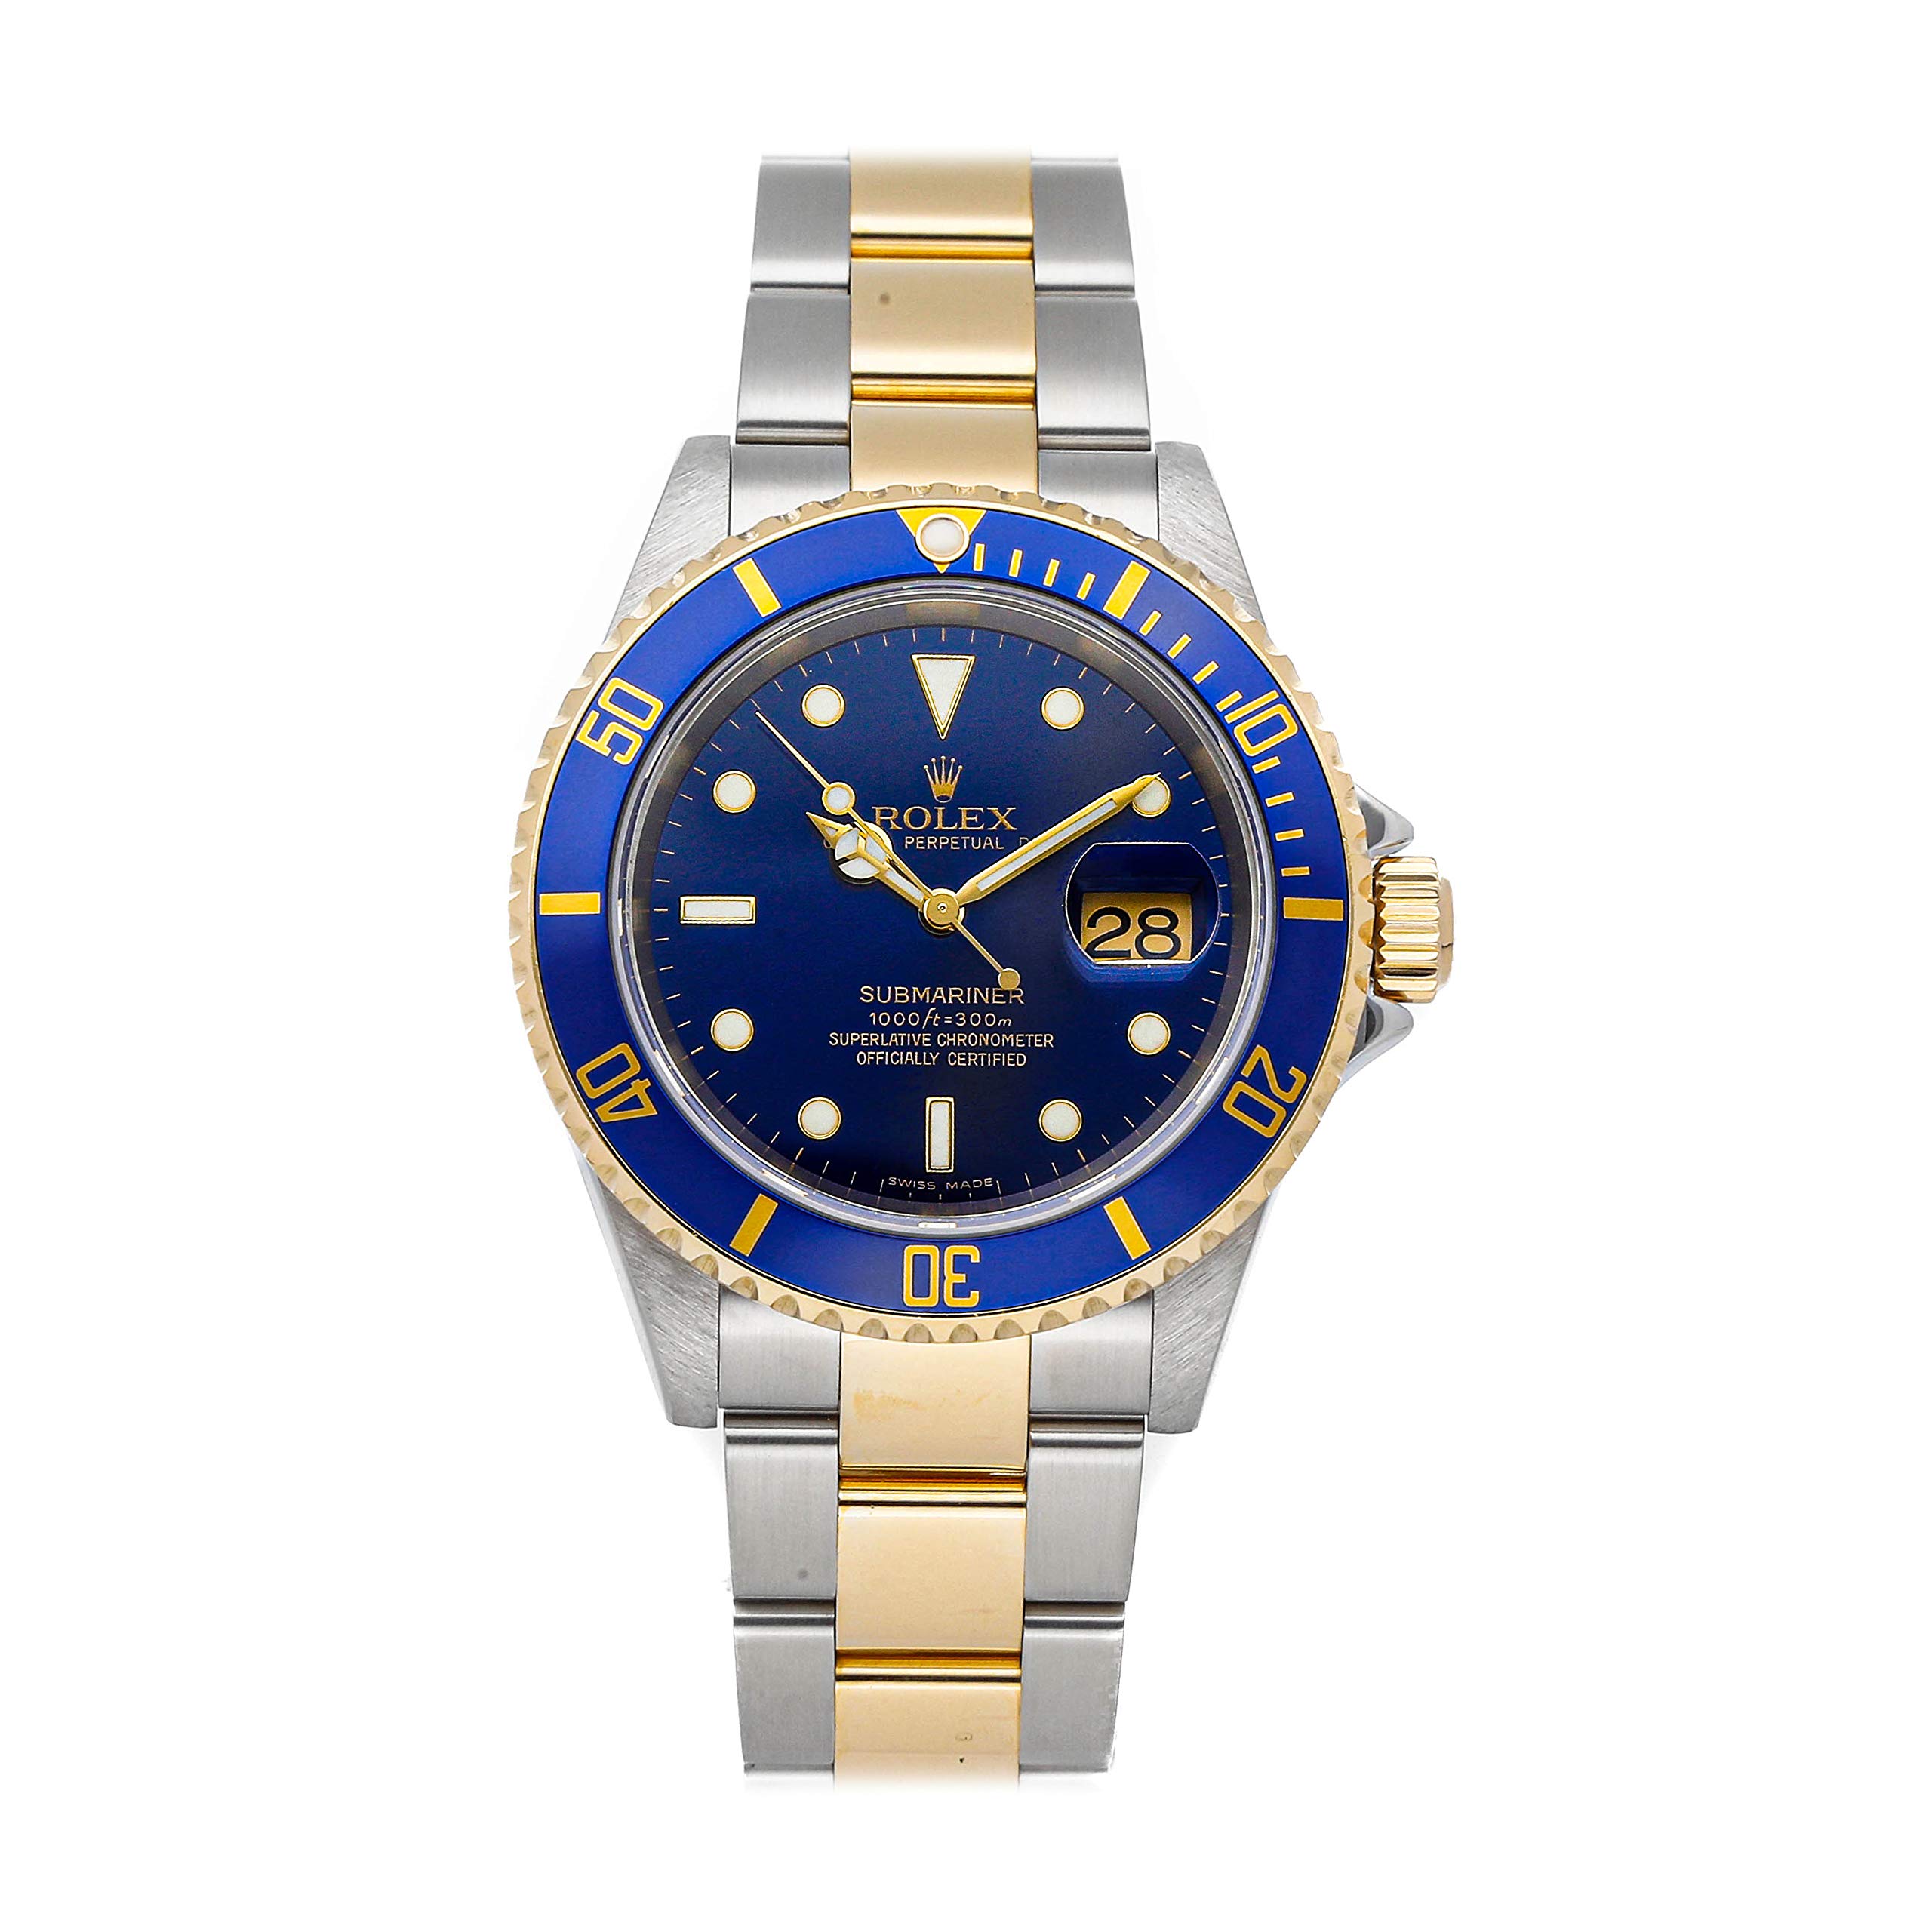 Rolex Submariner Mechanical (Automatic) Blue Dial Mens Watch